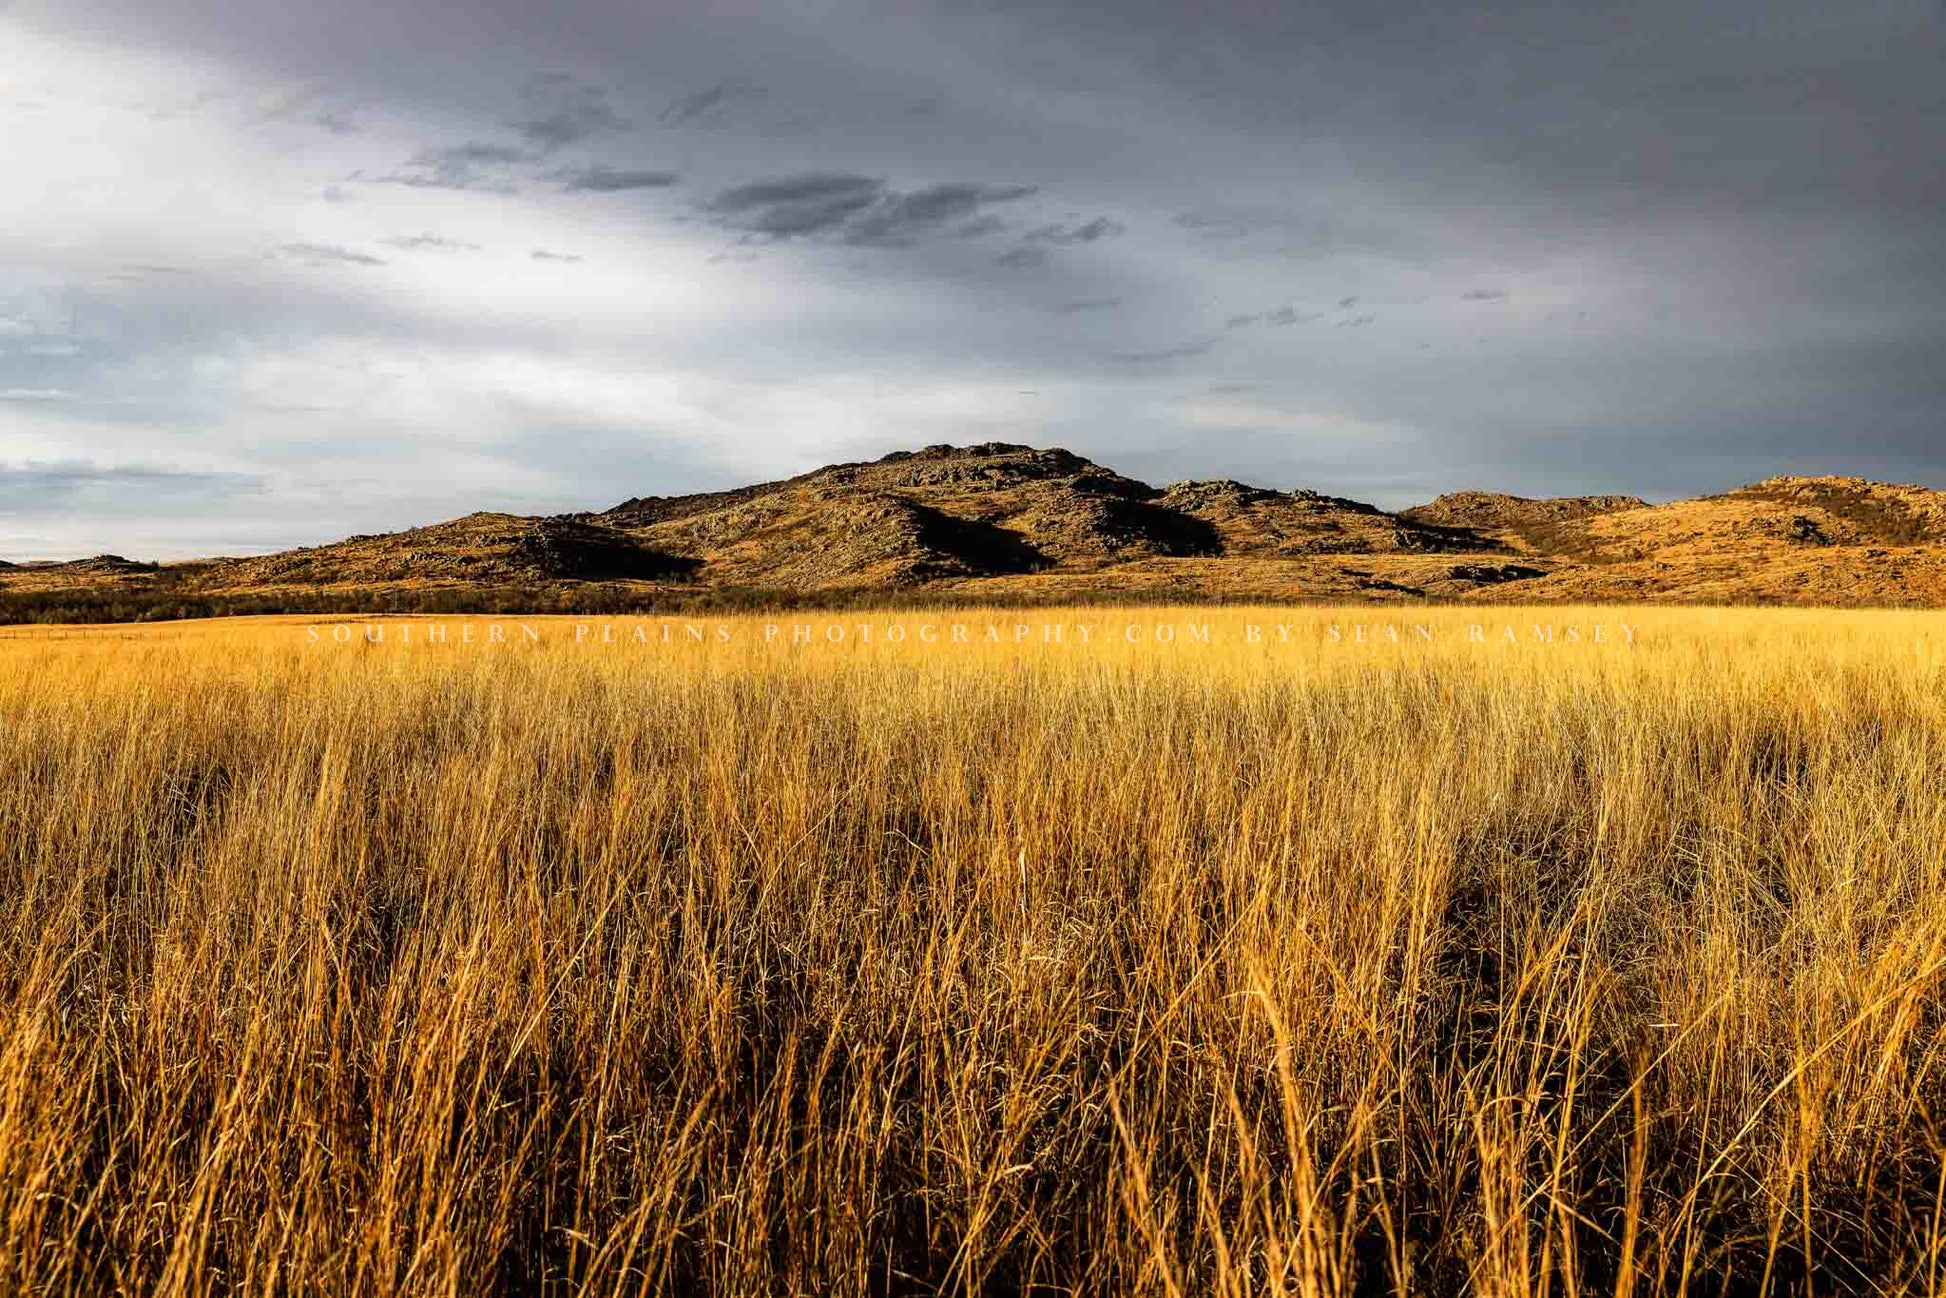 Landscape photography print of the Wichita Mountains overlooking golden prairie grass on a late autumn day at the Wichita Mountains Wildlife Refuge in Oklahoma by Sean Ramsey of Southern Plains Photography.